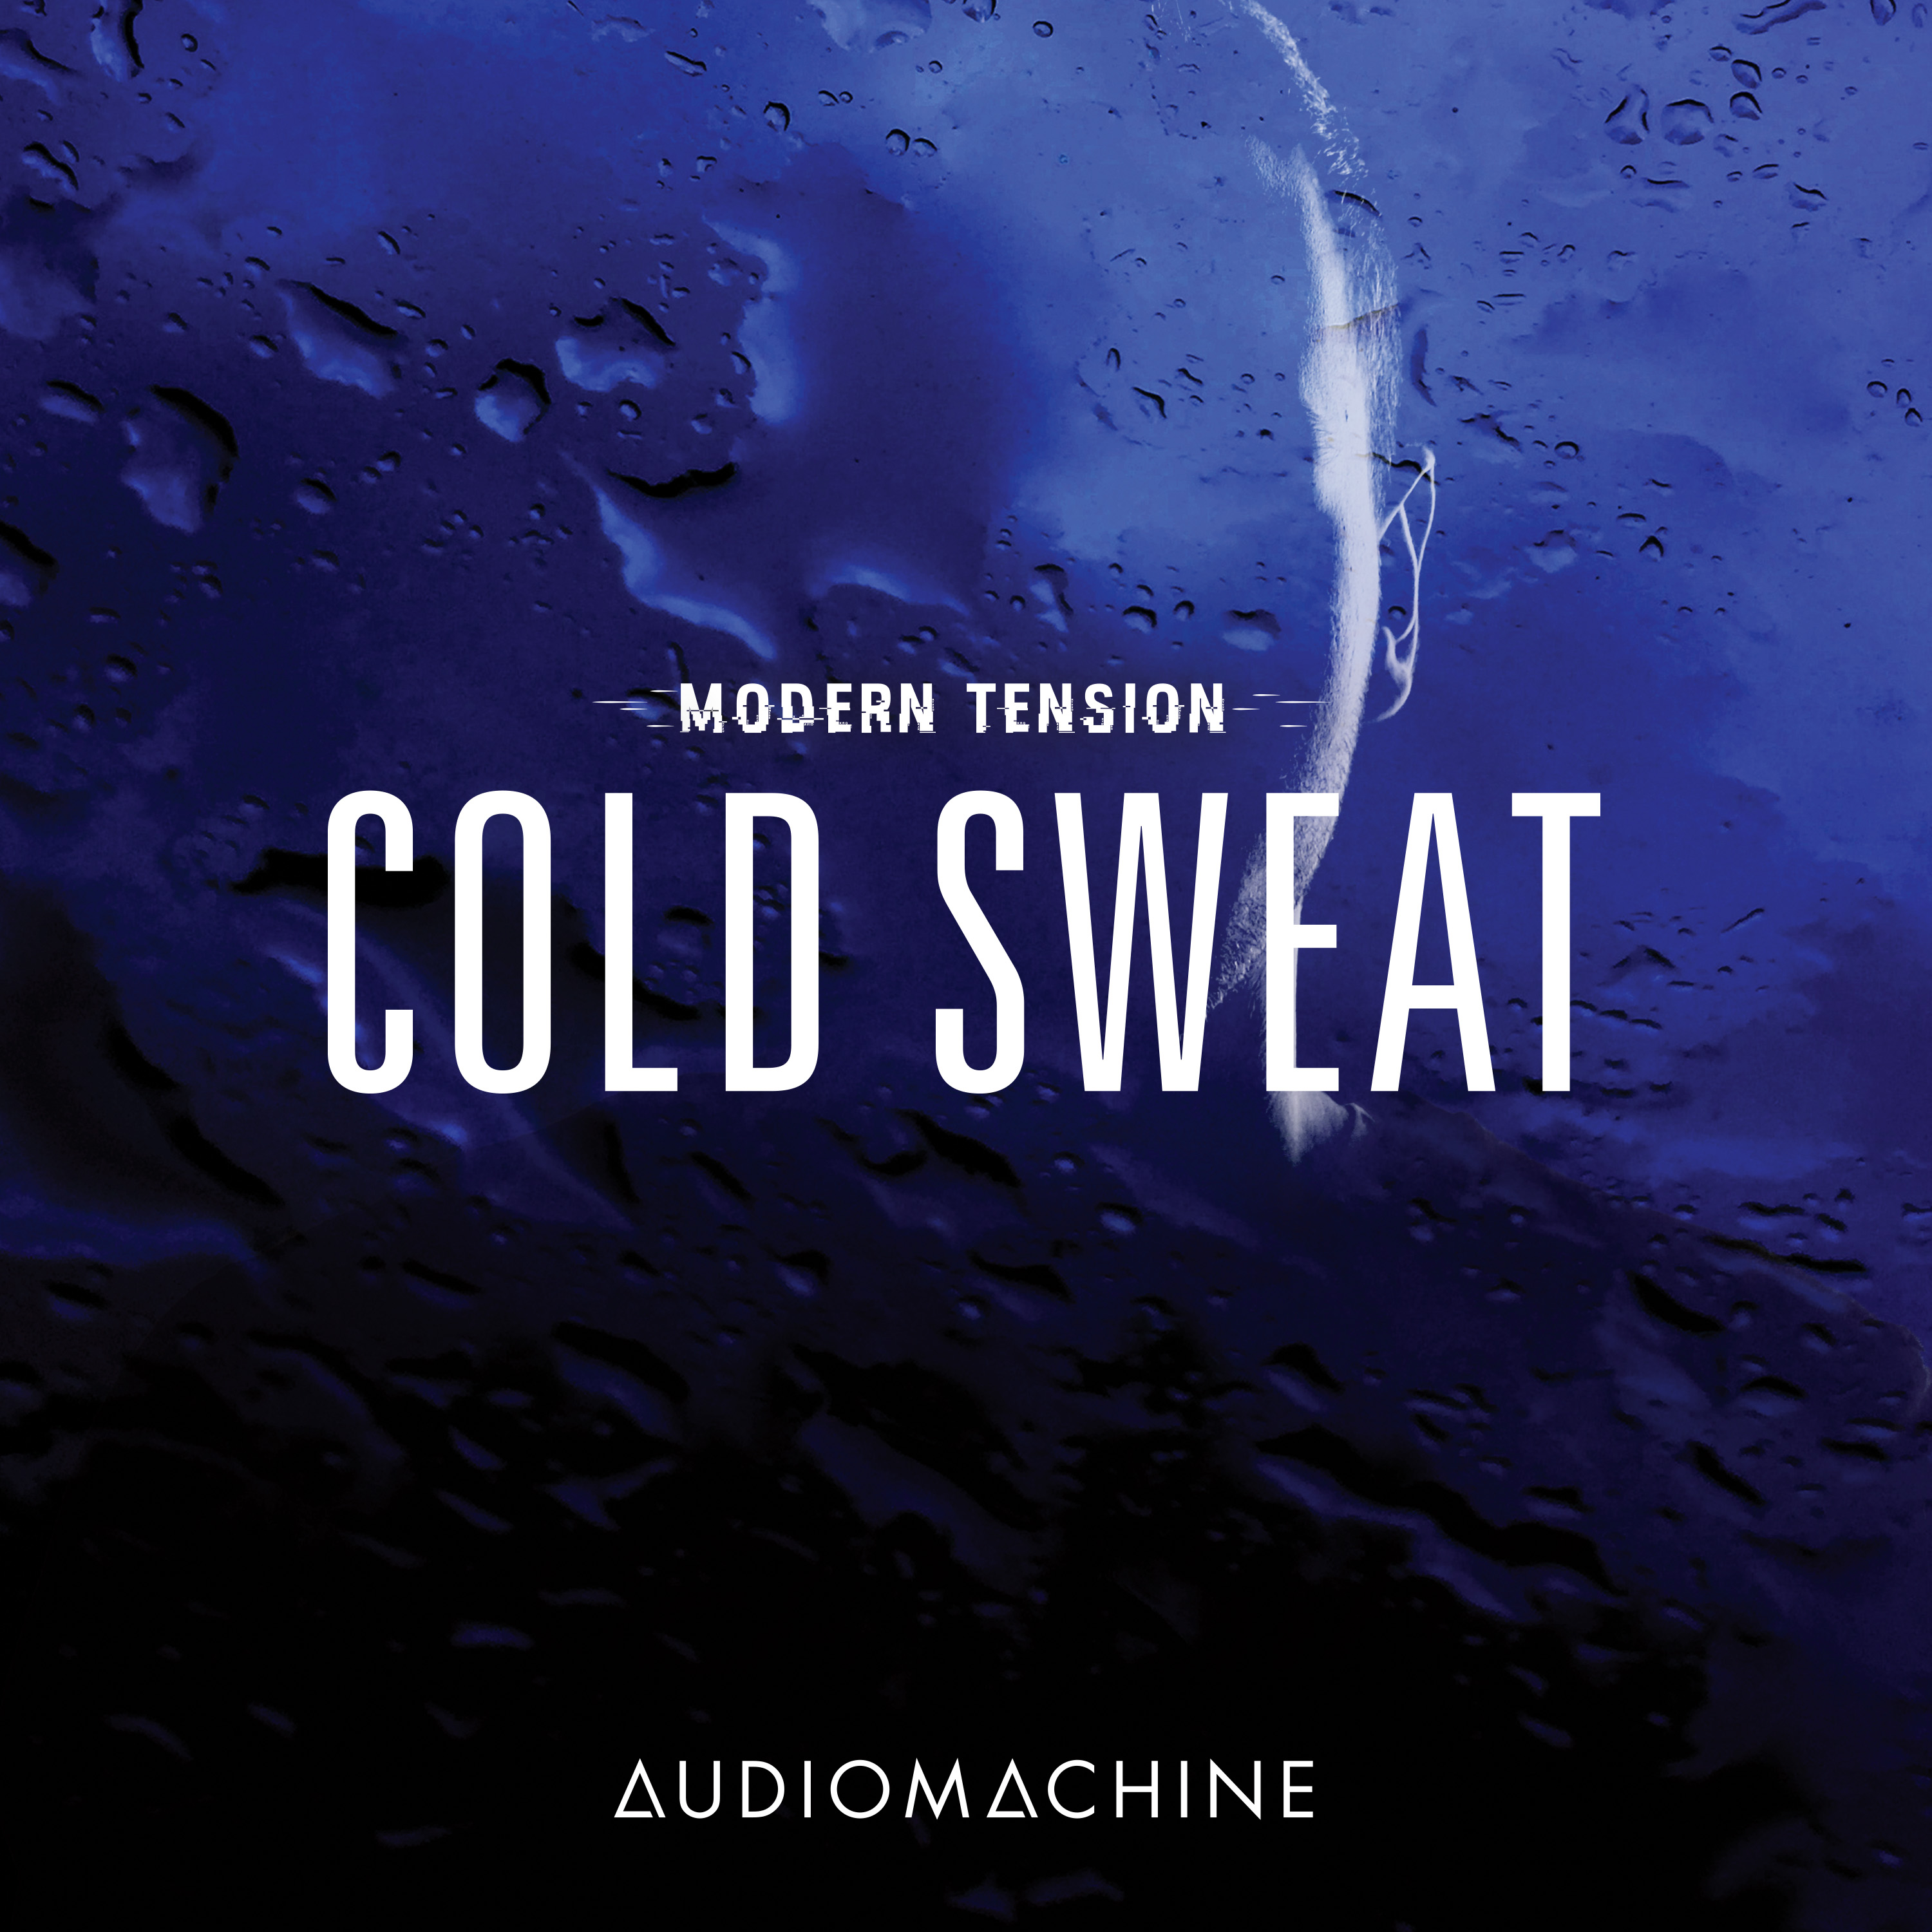 Modern Tension: Cold Sweat